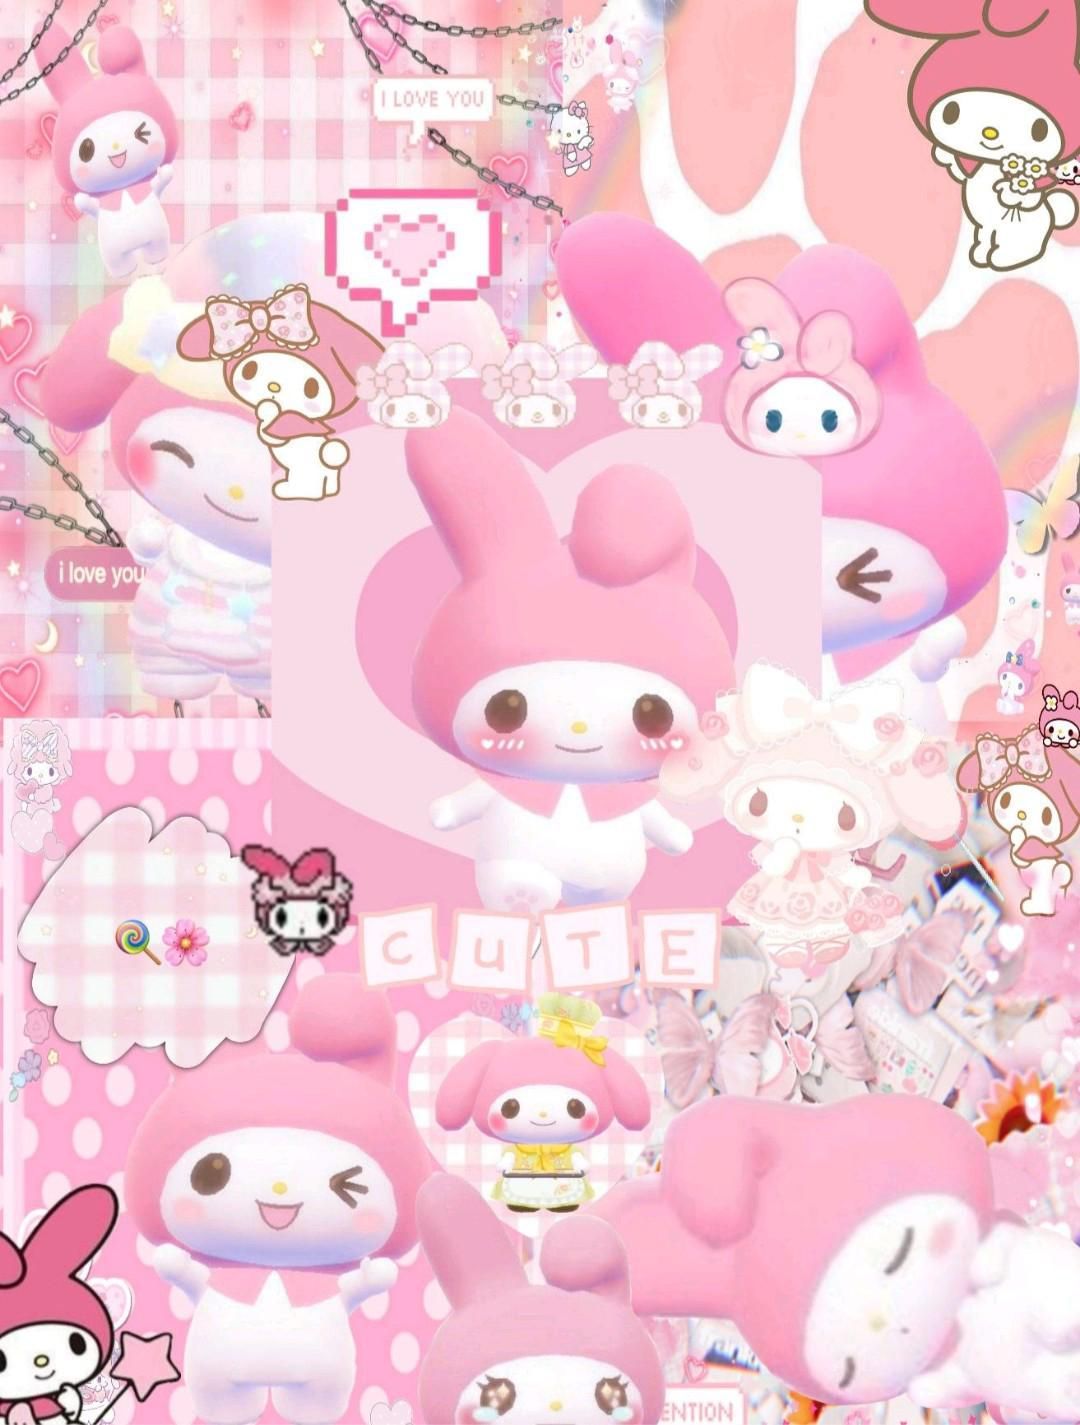 My Melody wallpaper by me! I hope you like it! - My Melody